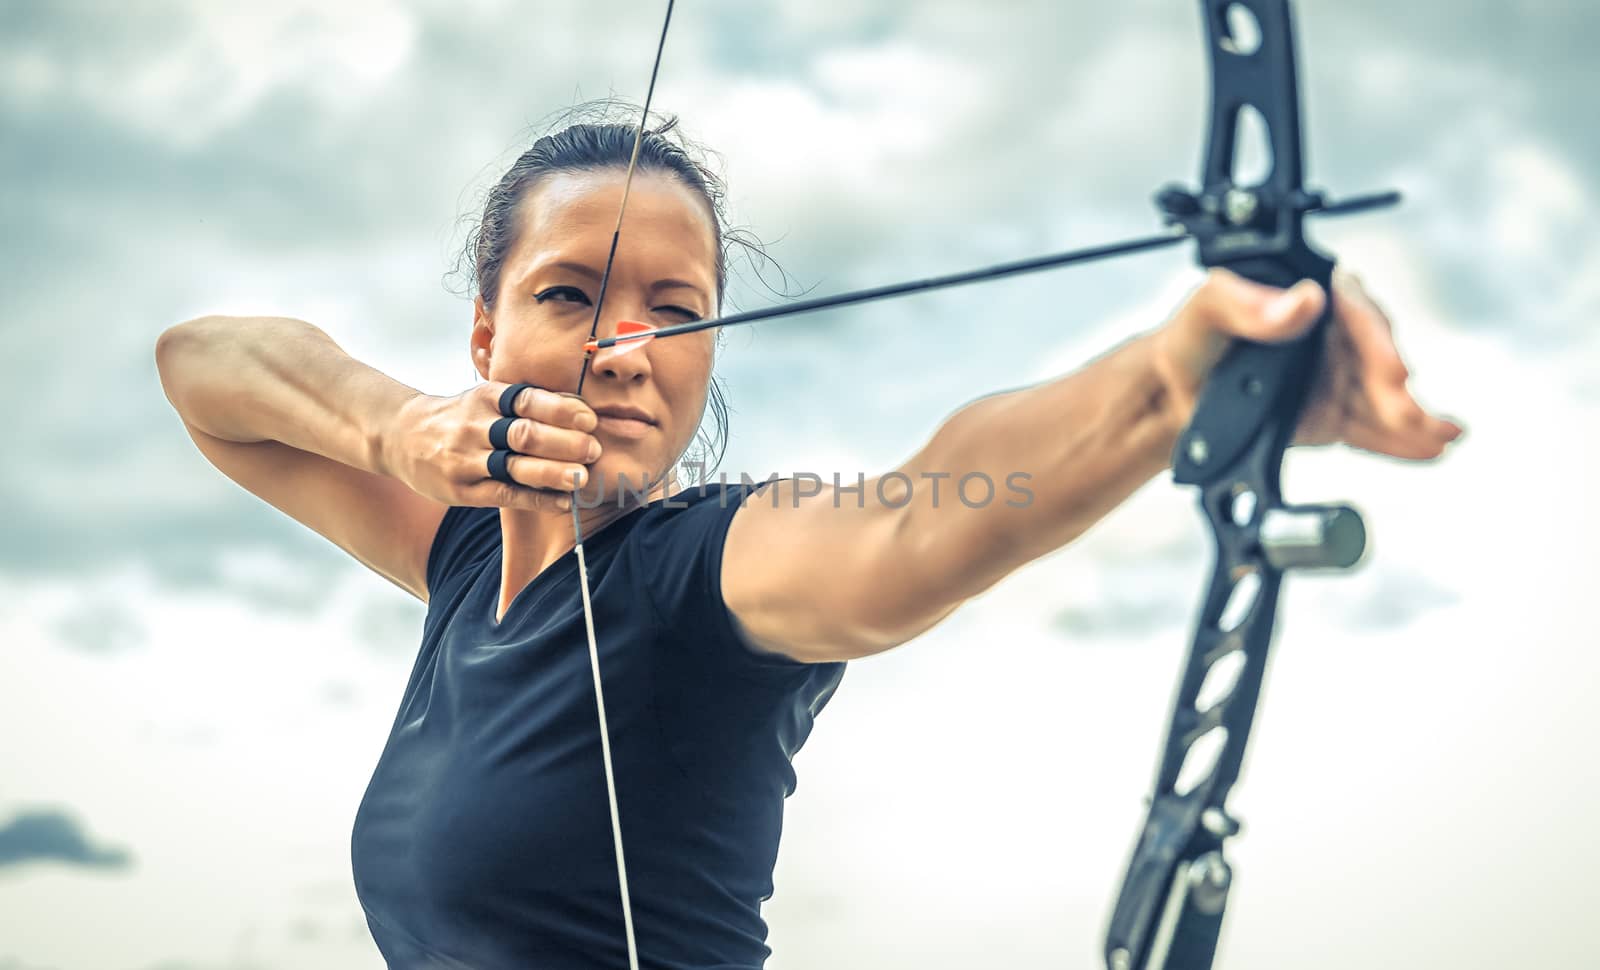 attractive woman on archery, focuses eye target for arrow from bow